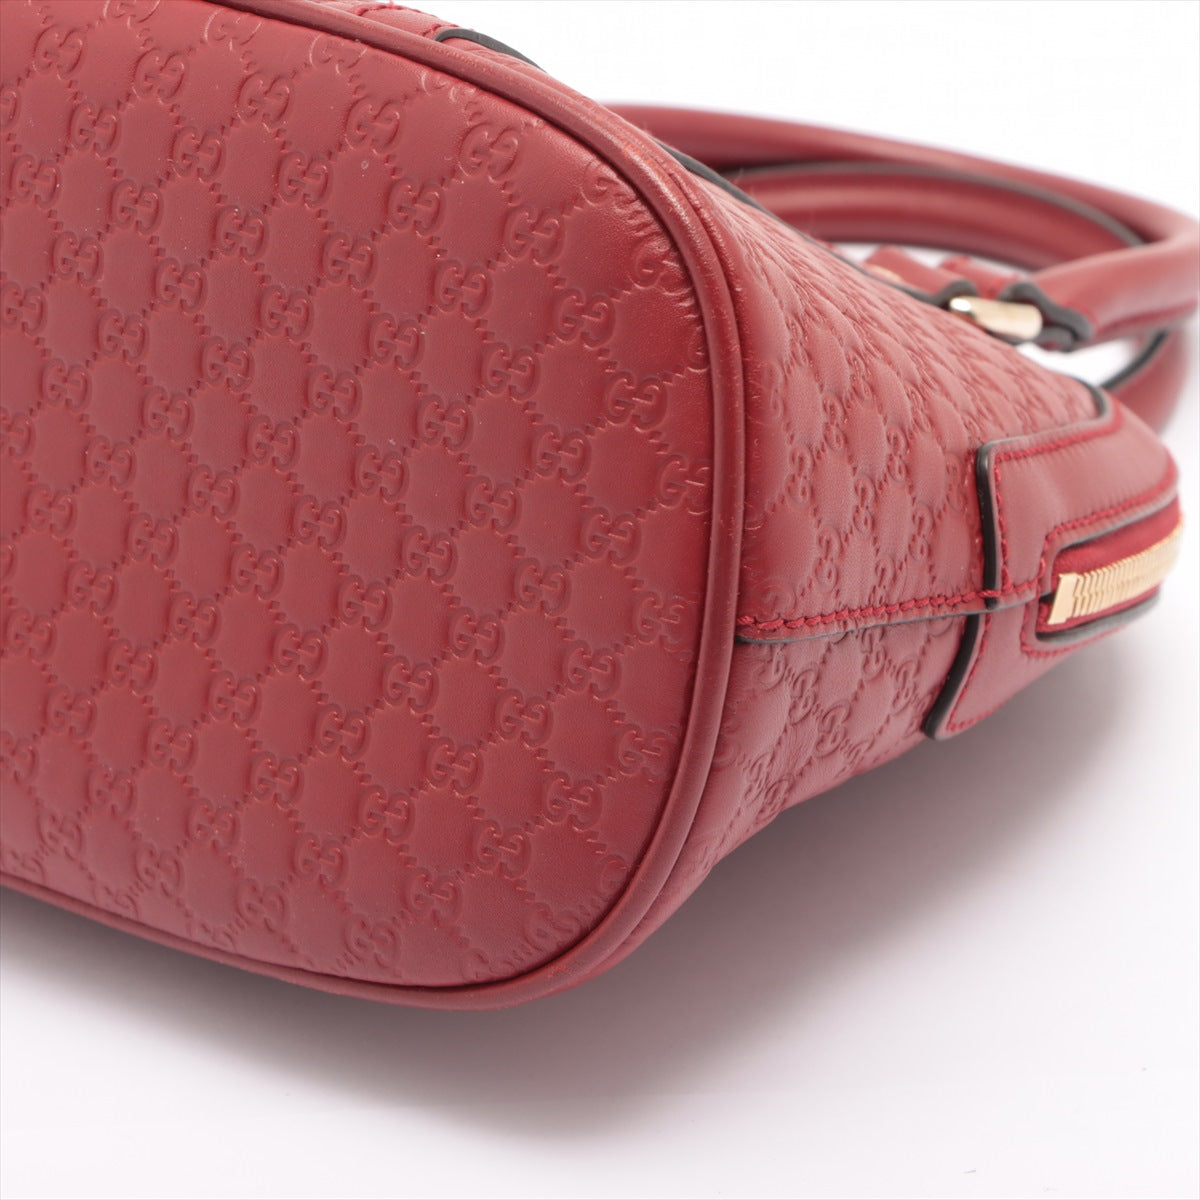 Gucci Micro Gucci Leather 2way shoulder bag Red 449654